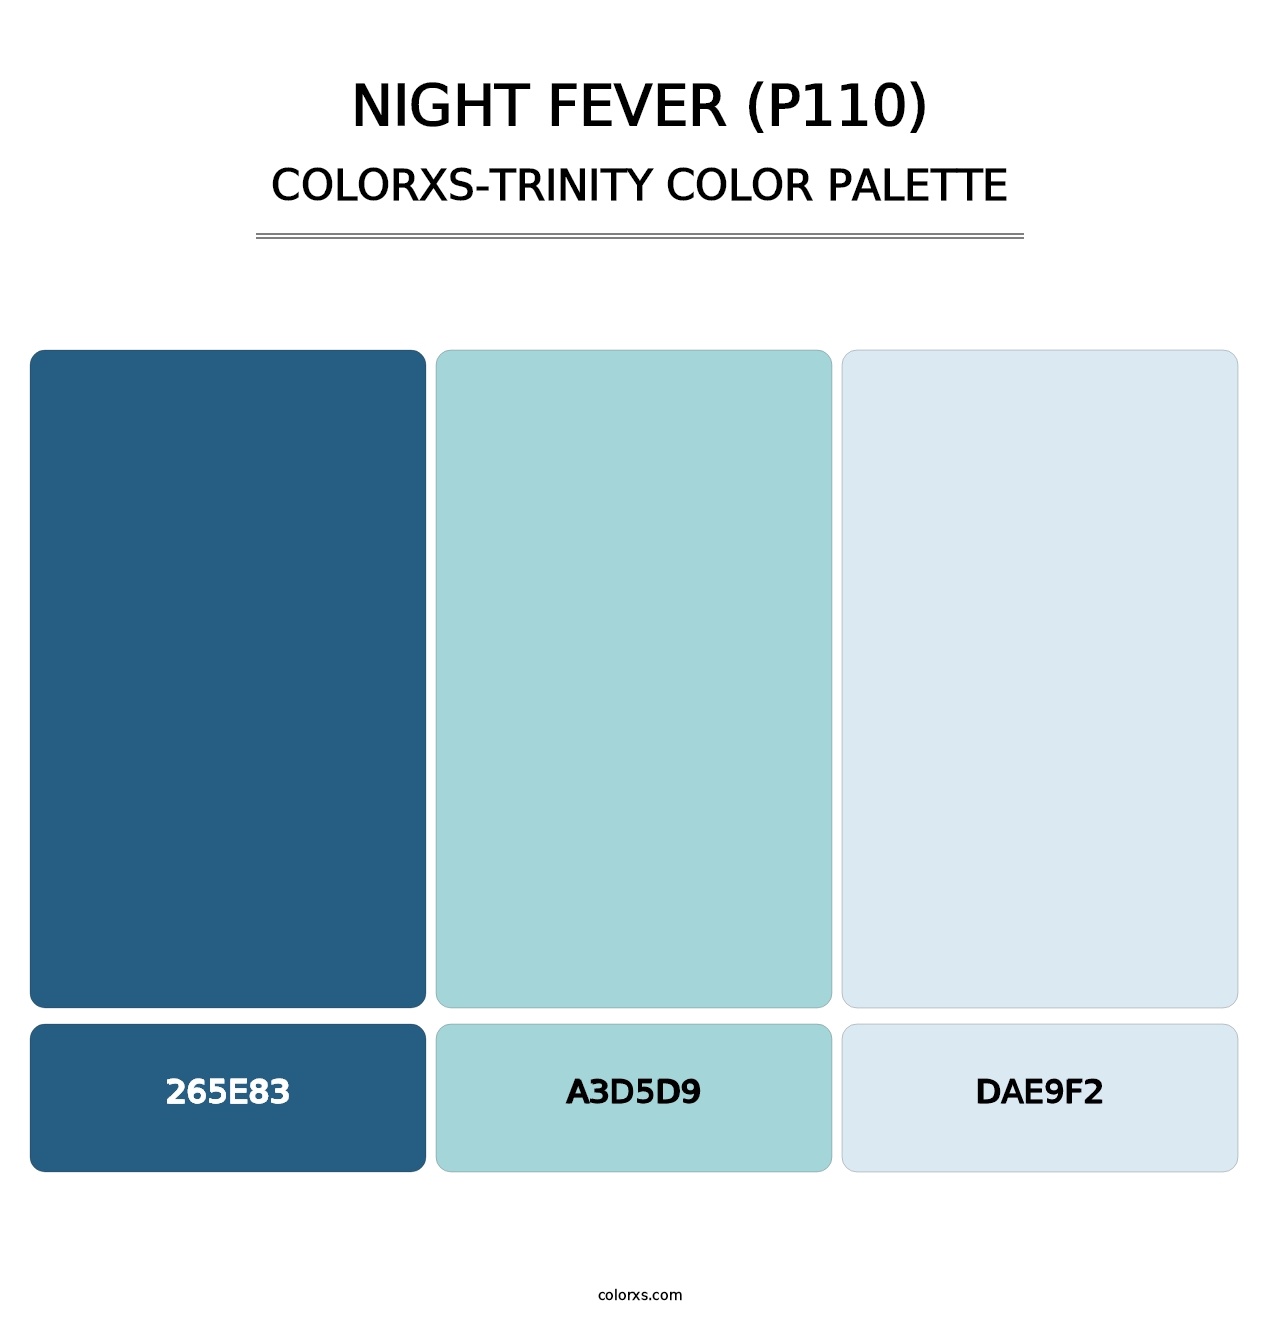 Night Fever (P110) - Colorxs Trinity Palette